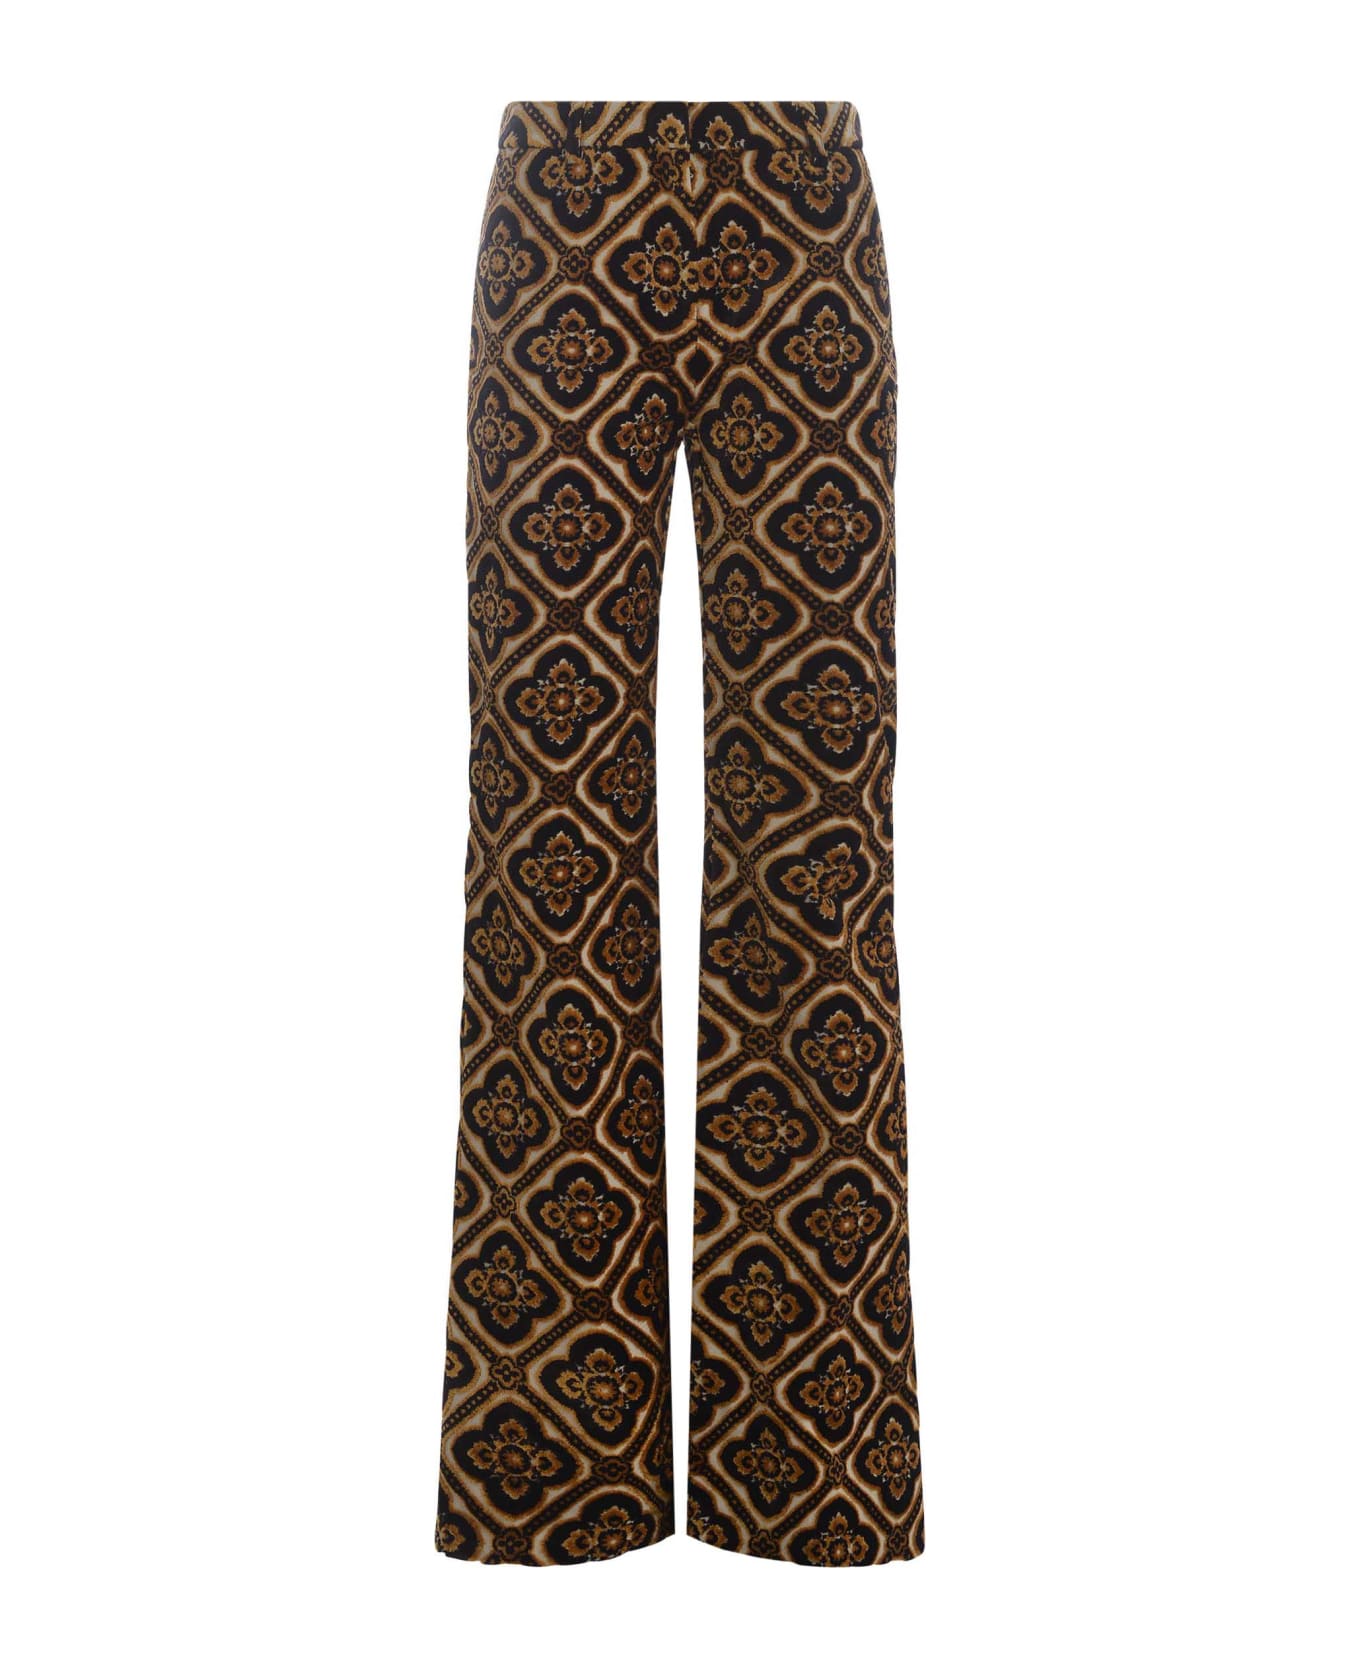 Etro Black Jacquard Trousers With Medallions - Black